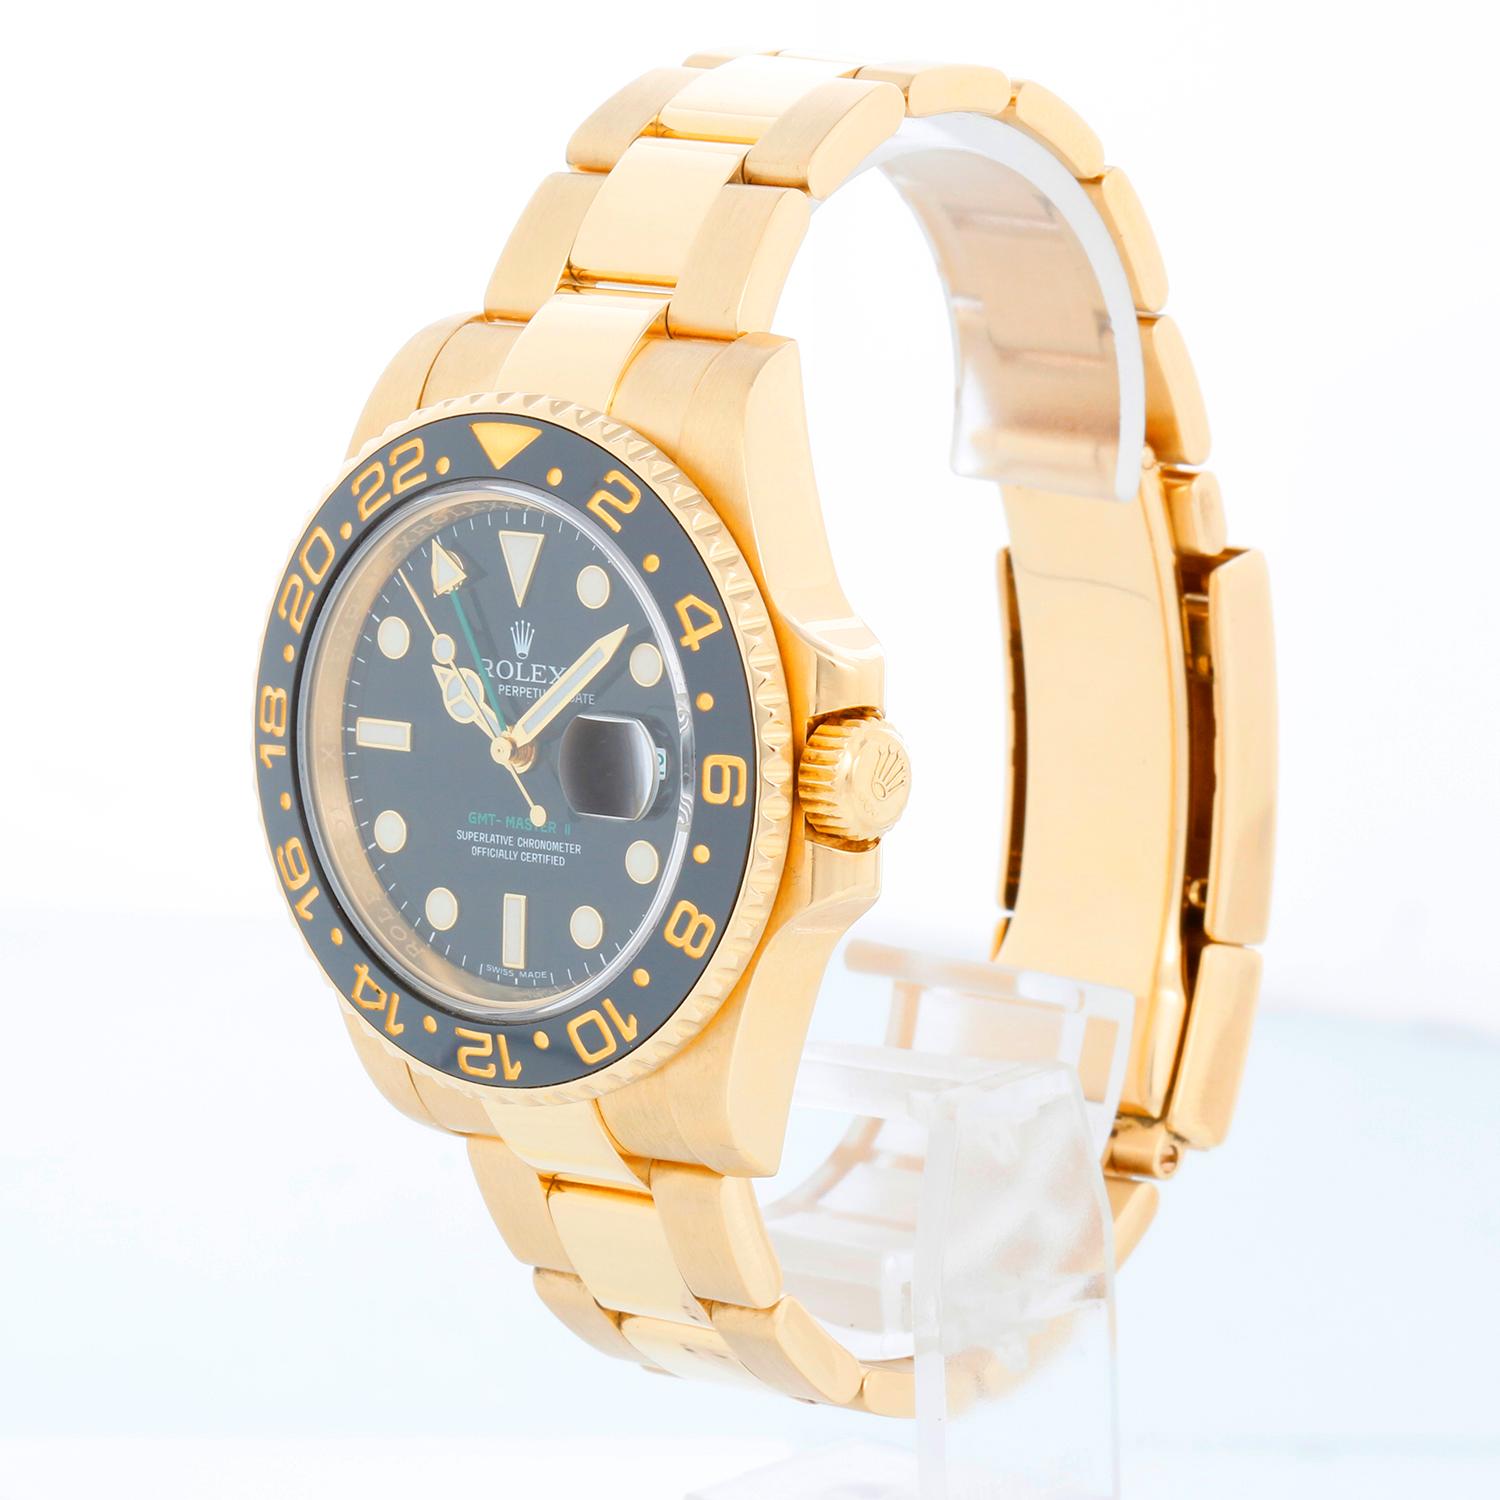 Rolex GMT-Master II Men's 18k Yellow Gold Watch 116718 In Excellent Condition For Sale In Dallas, TX